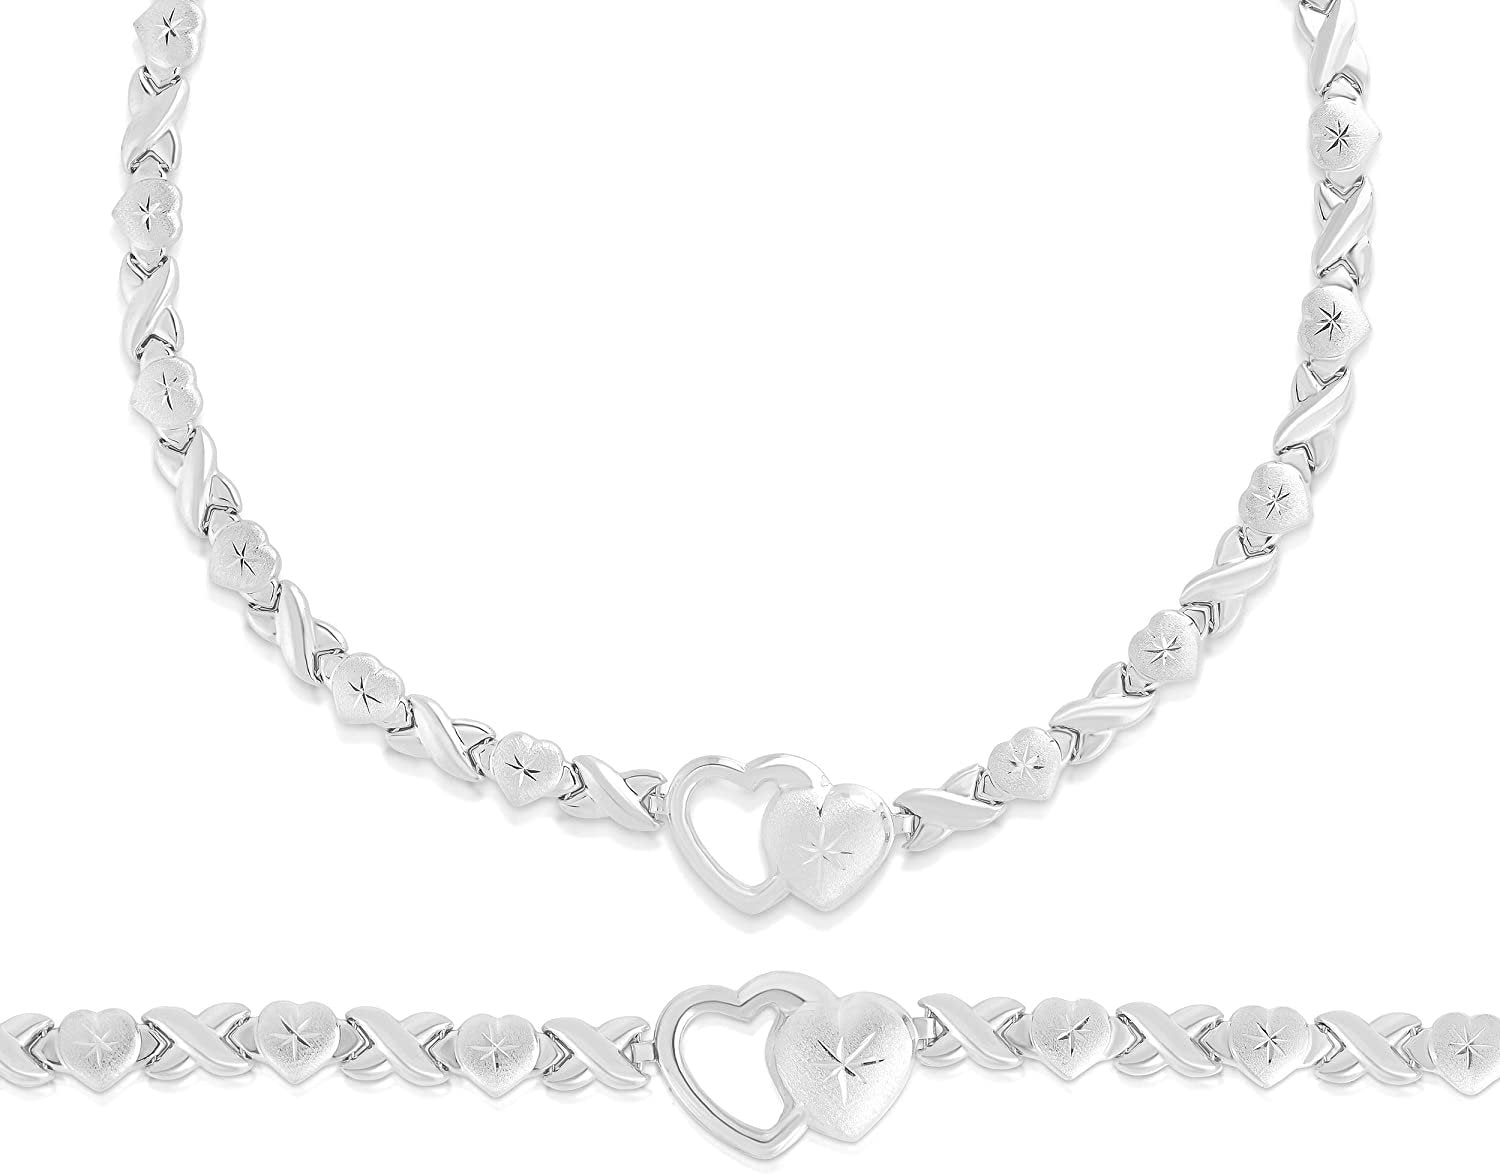 Floreo 925 Sterling Silver Stampato XOXO Hugs and Kisses with Open Heart Pendant Bracelet and Necklace Set